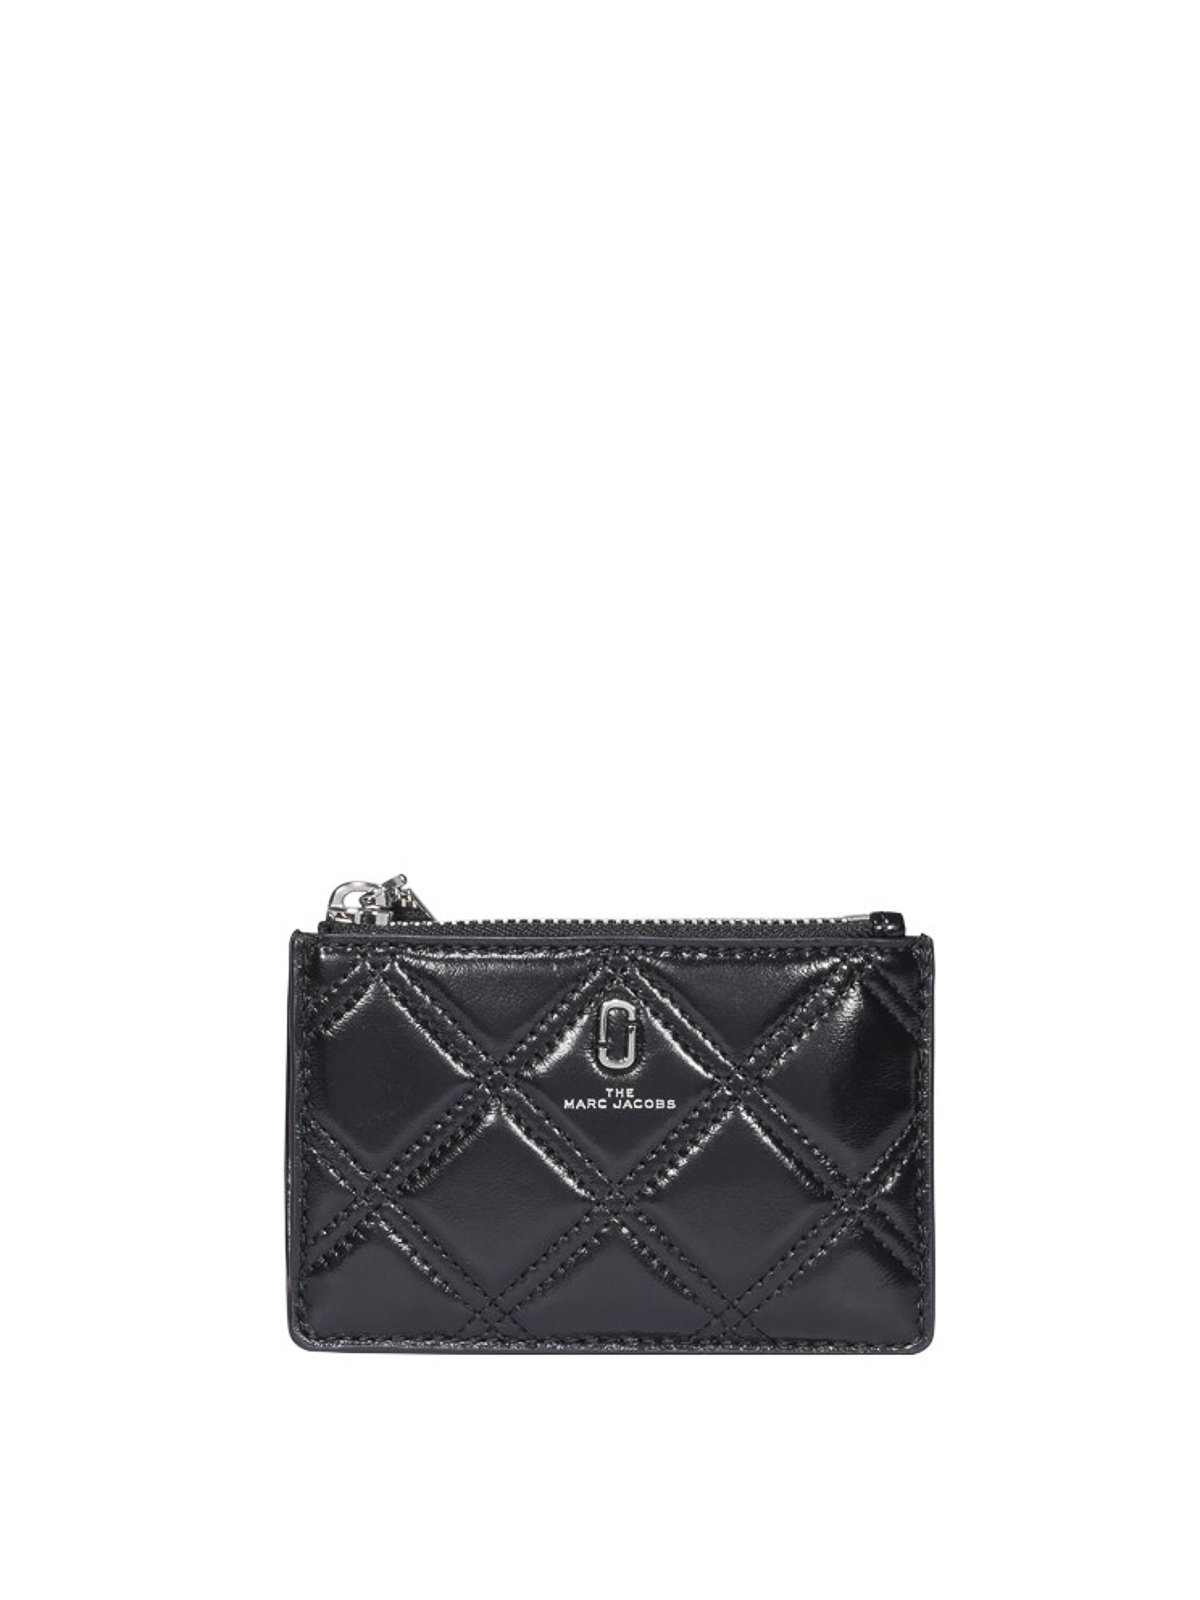 MARC JACOBS Quilted Softshot Leather Top Zip Wallet